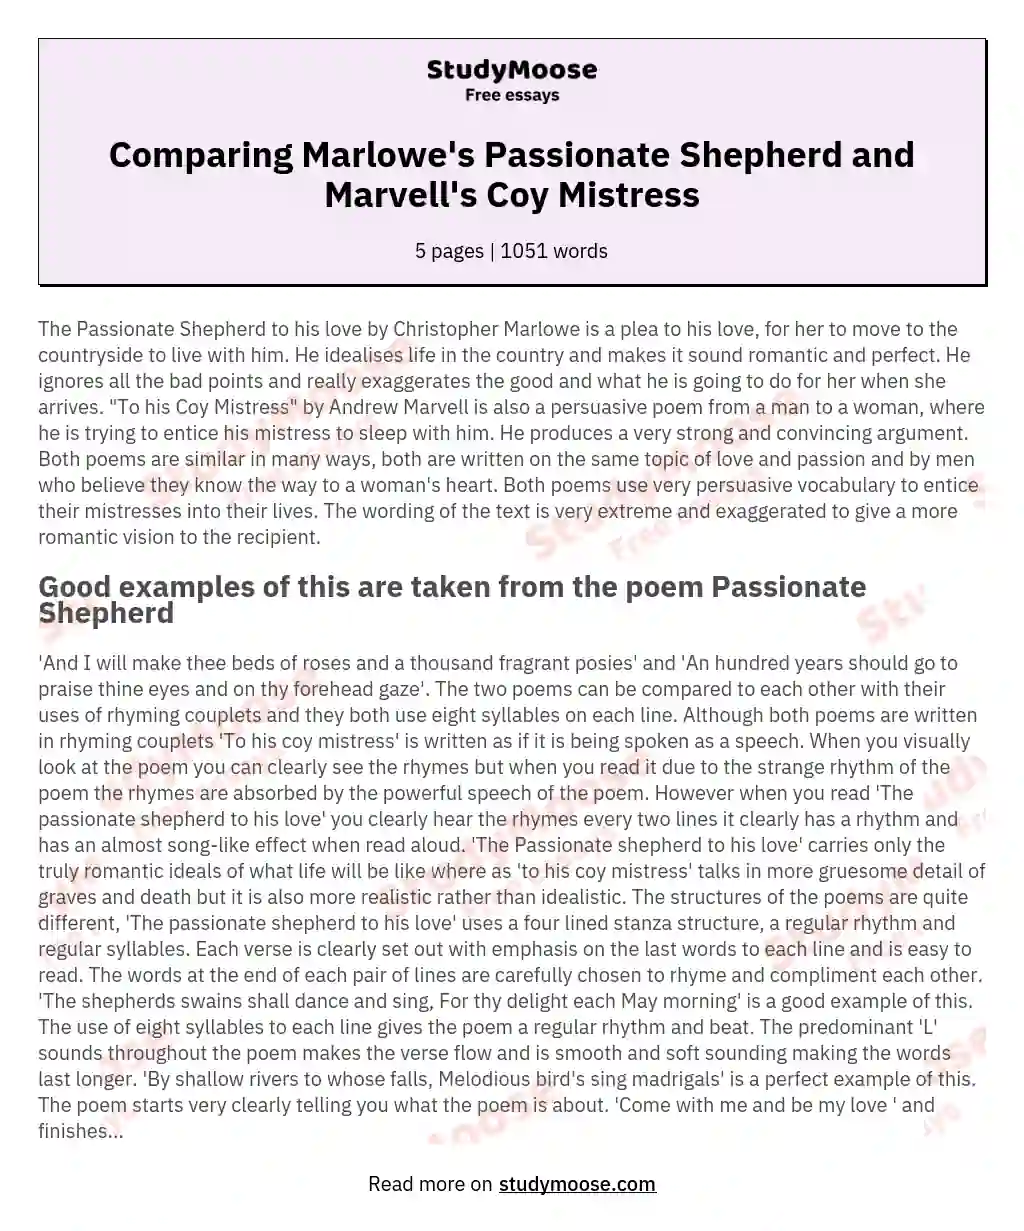 Comparing Marlowe's Passionate Shepherd and Marvell's Coy Mistress essay